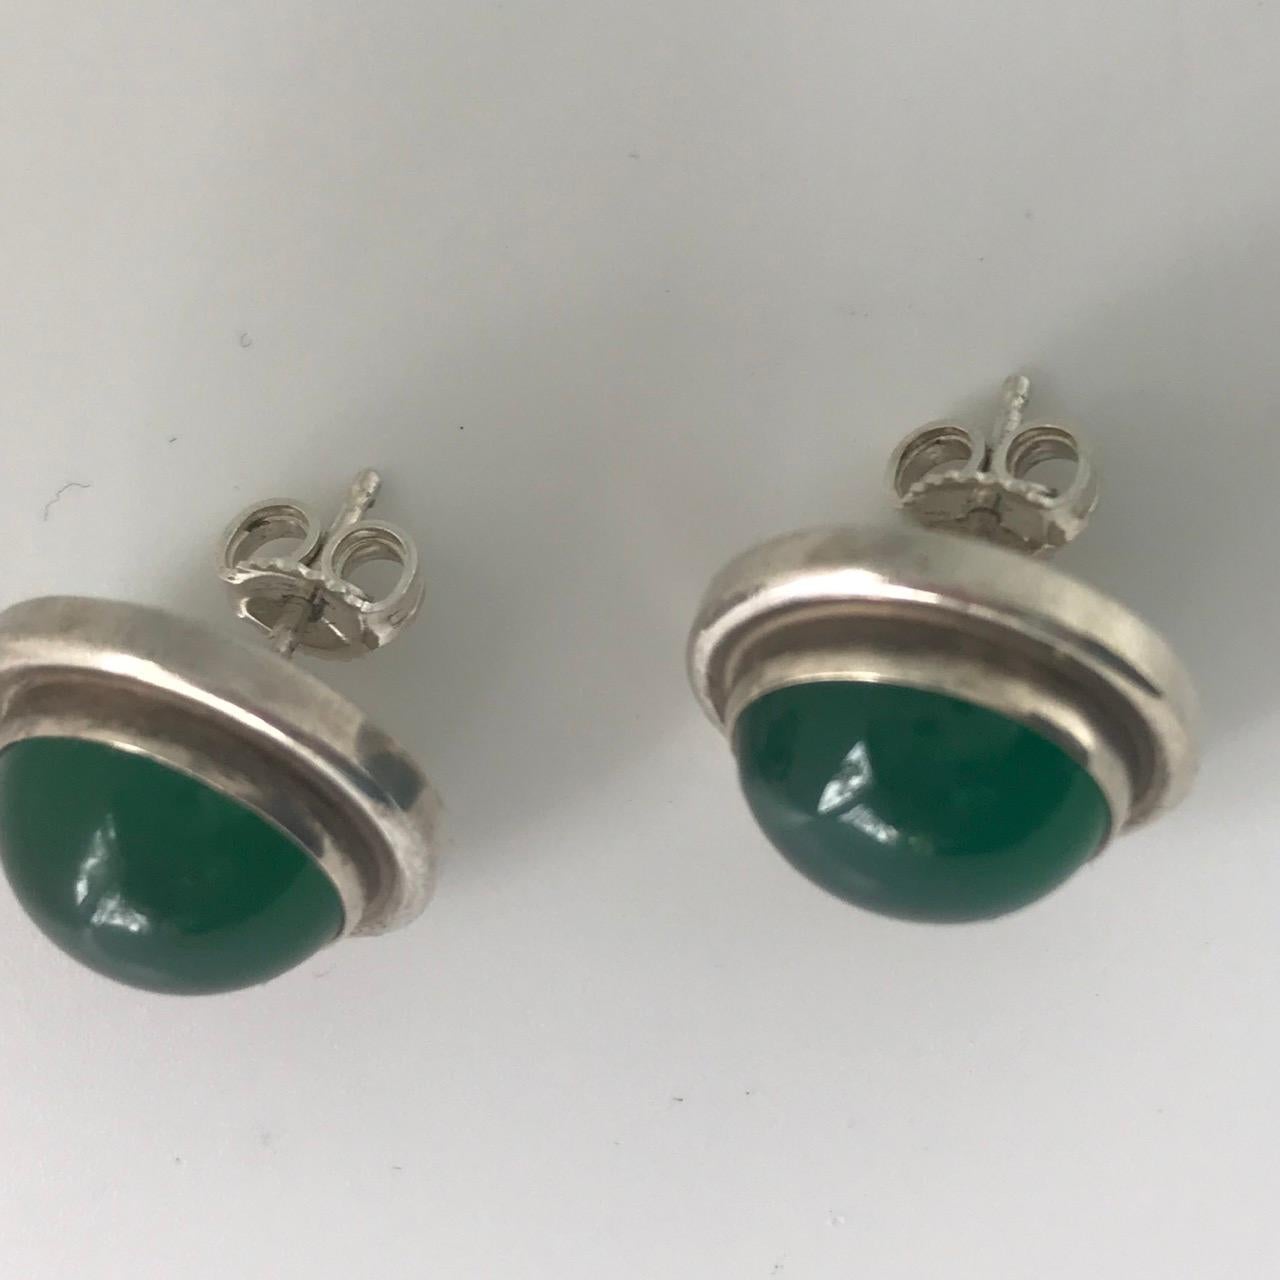 Georg Jensen Sterling Silver Earrings No.44D With Green Agate.
Complimentary gift box included with purchase.

Harald Nielsen design. These have been converted to postbacks. Very good condition.

Harald Nielsen (1892 - 1977) is an important figure